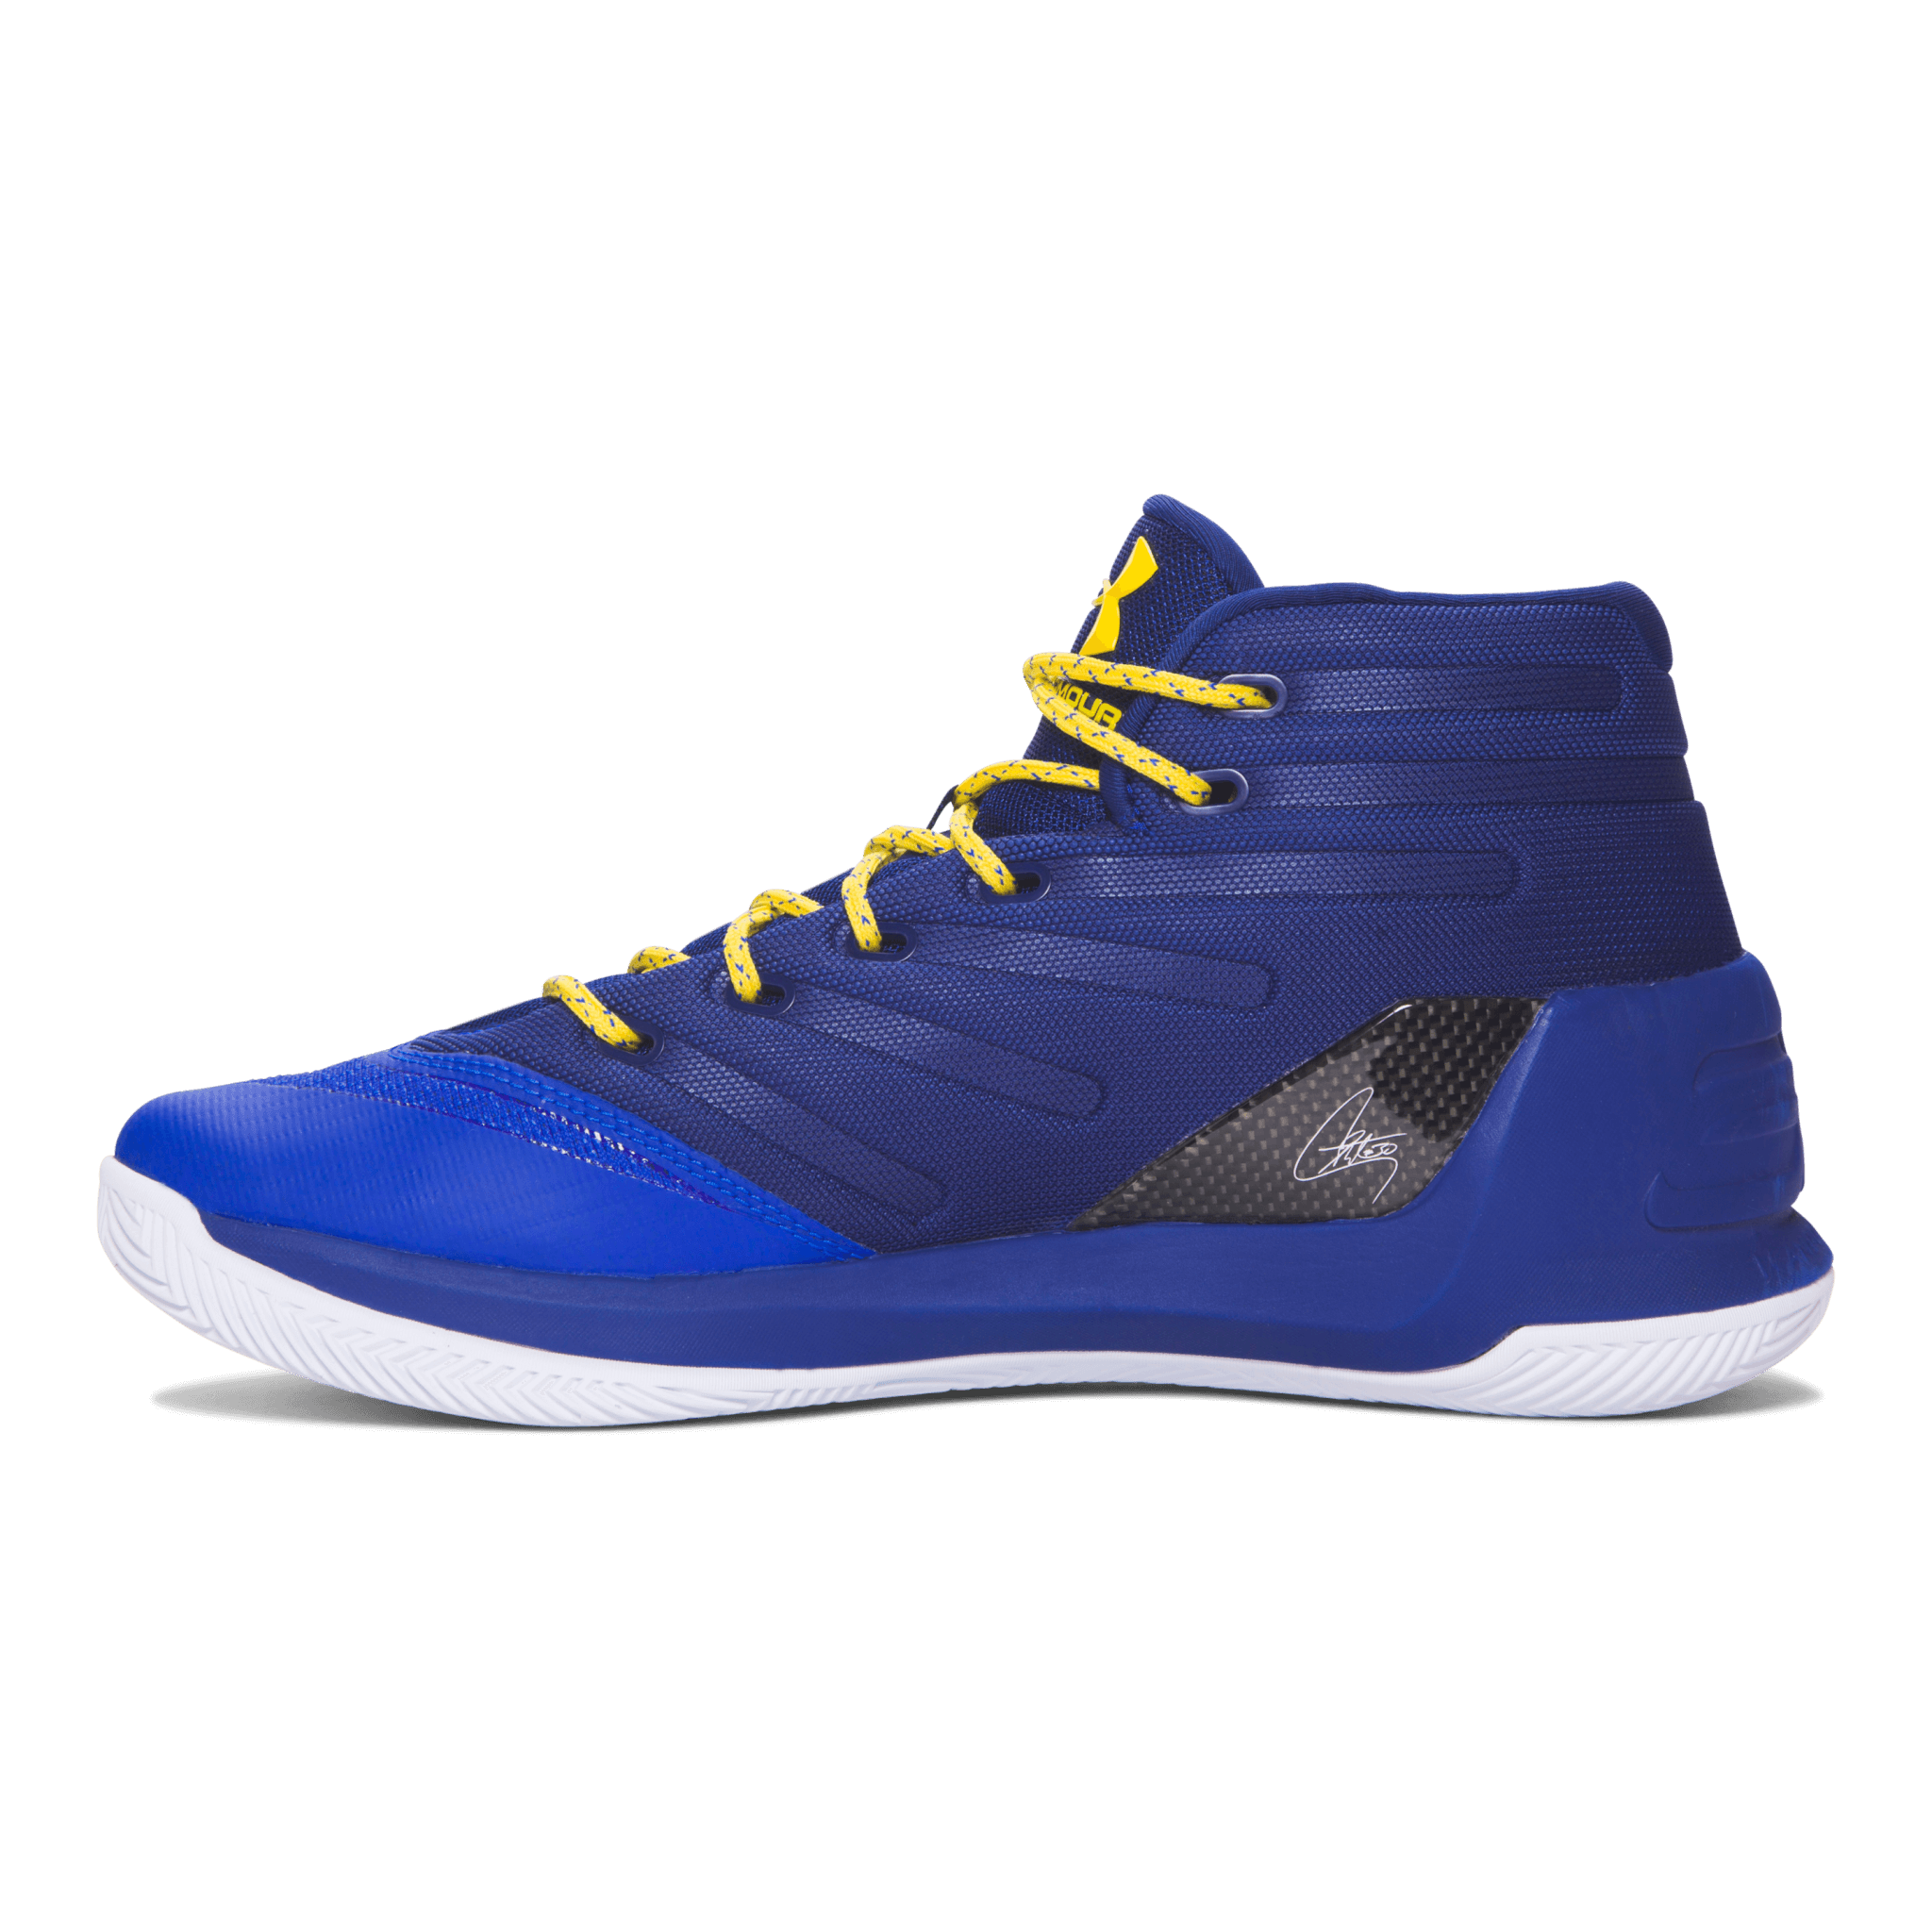 Under Armour Curry 3 Performance Review | 10 Sneaker Expert Opinions